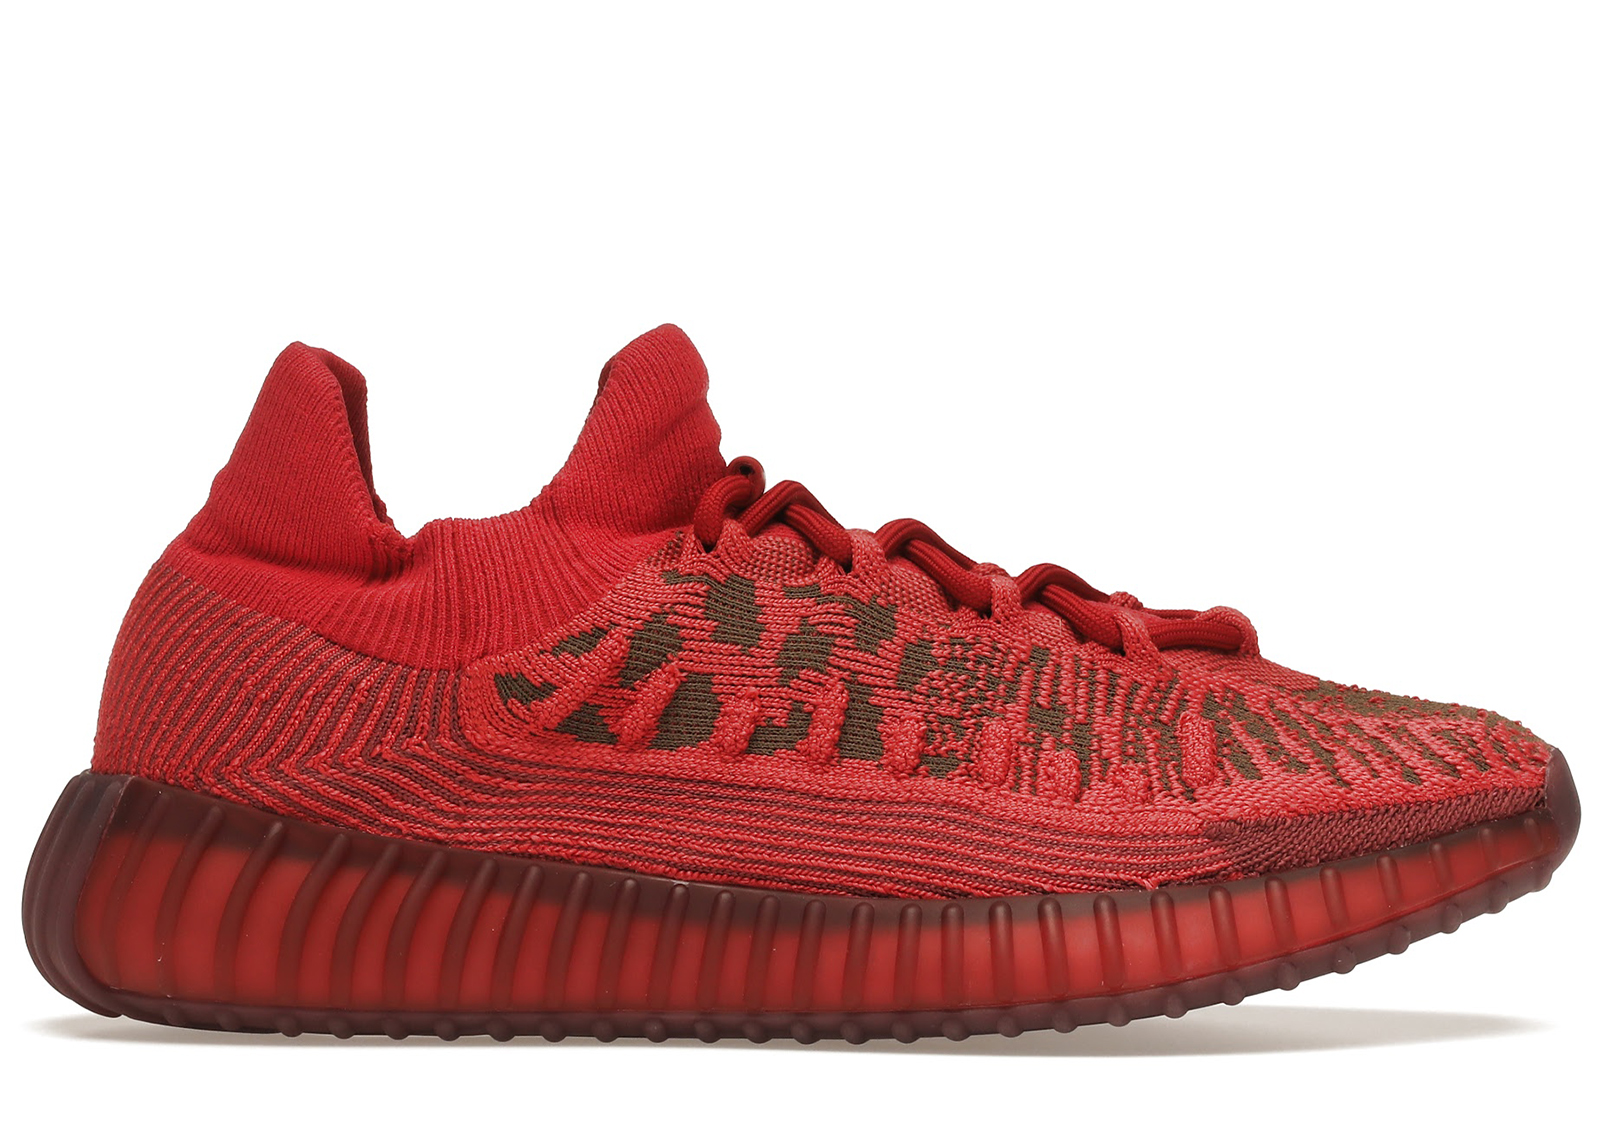 Buy adidas Yeezy 350 v2 Shoes & New Sneakers - StockX